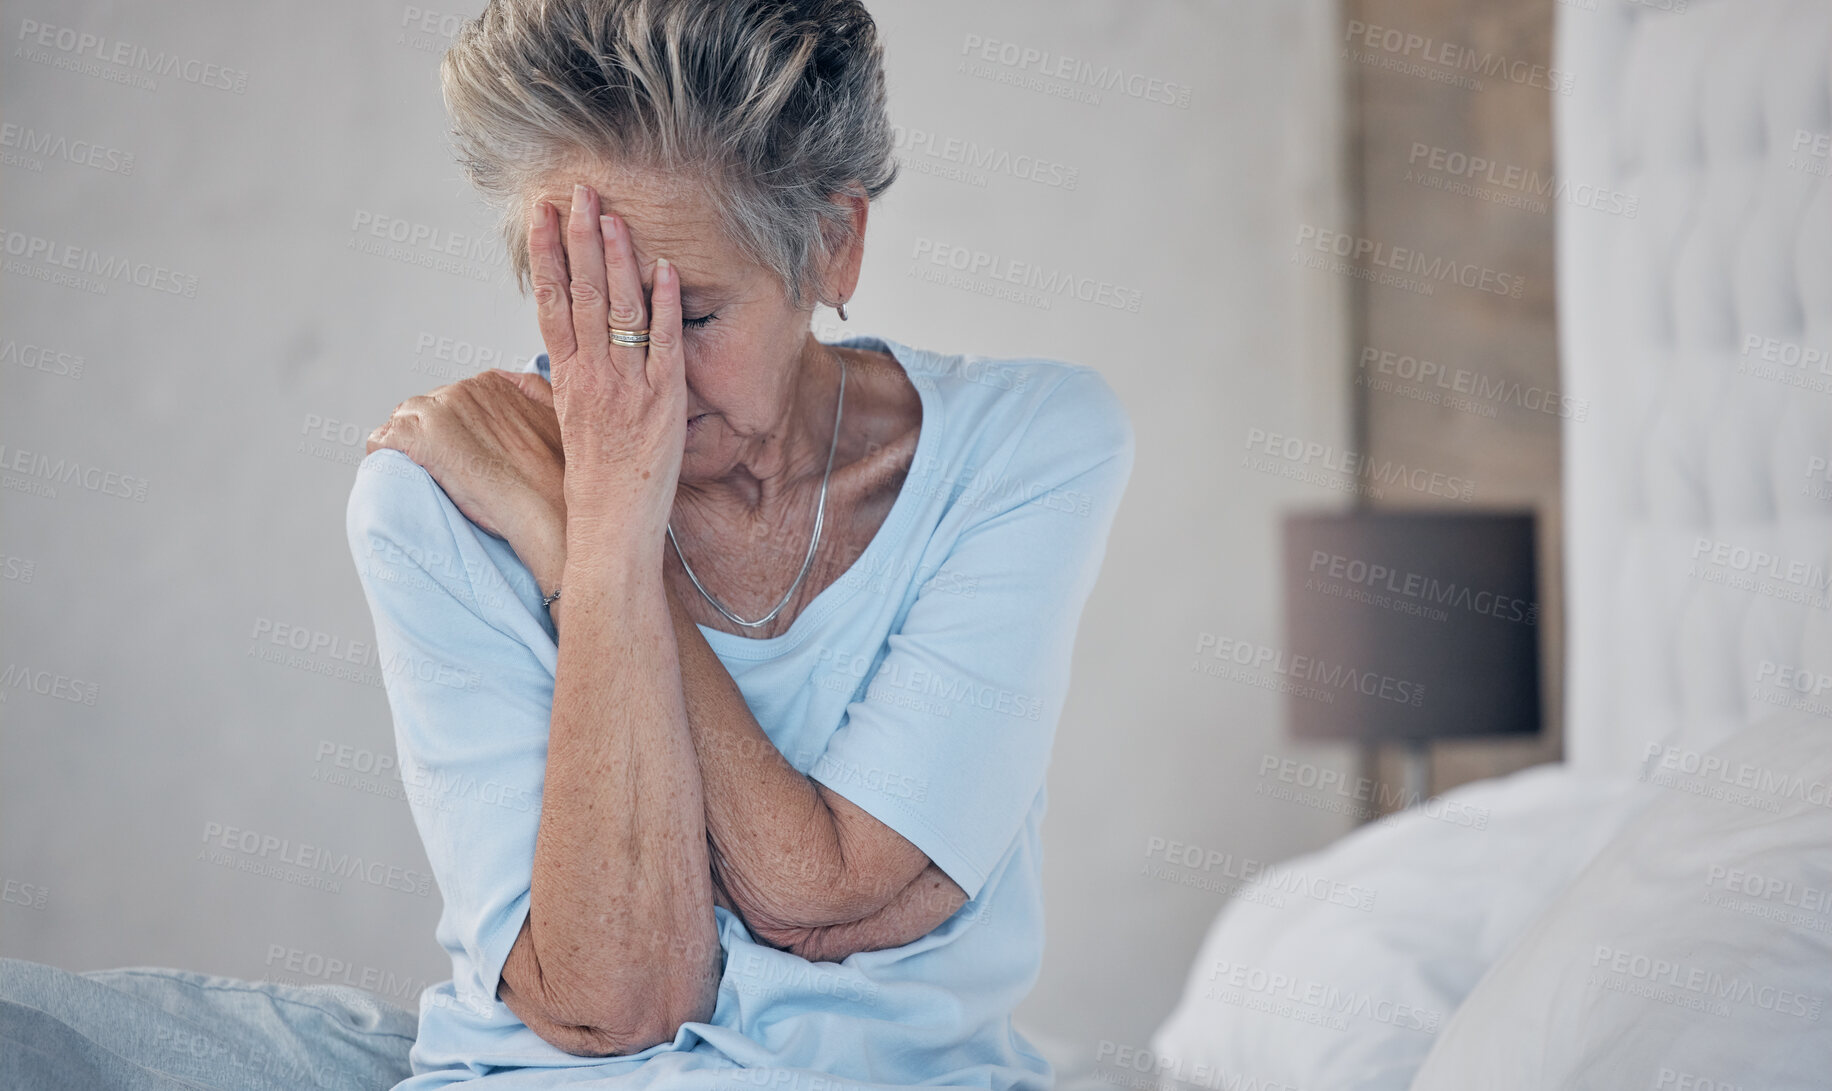 Buy stock photo Headache, sick and mature woman with depression, anxiety or mental health problem in the bedroom. Sad, stress and elderly person with insomnia, migraine pain and depressed from fatigue or divorce